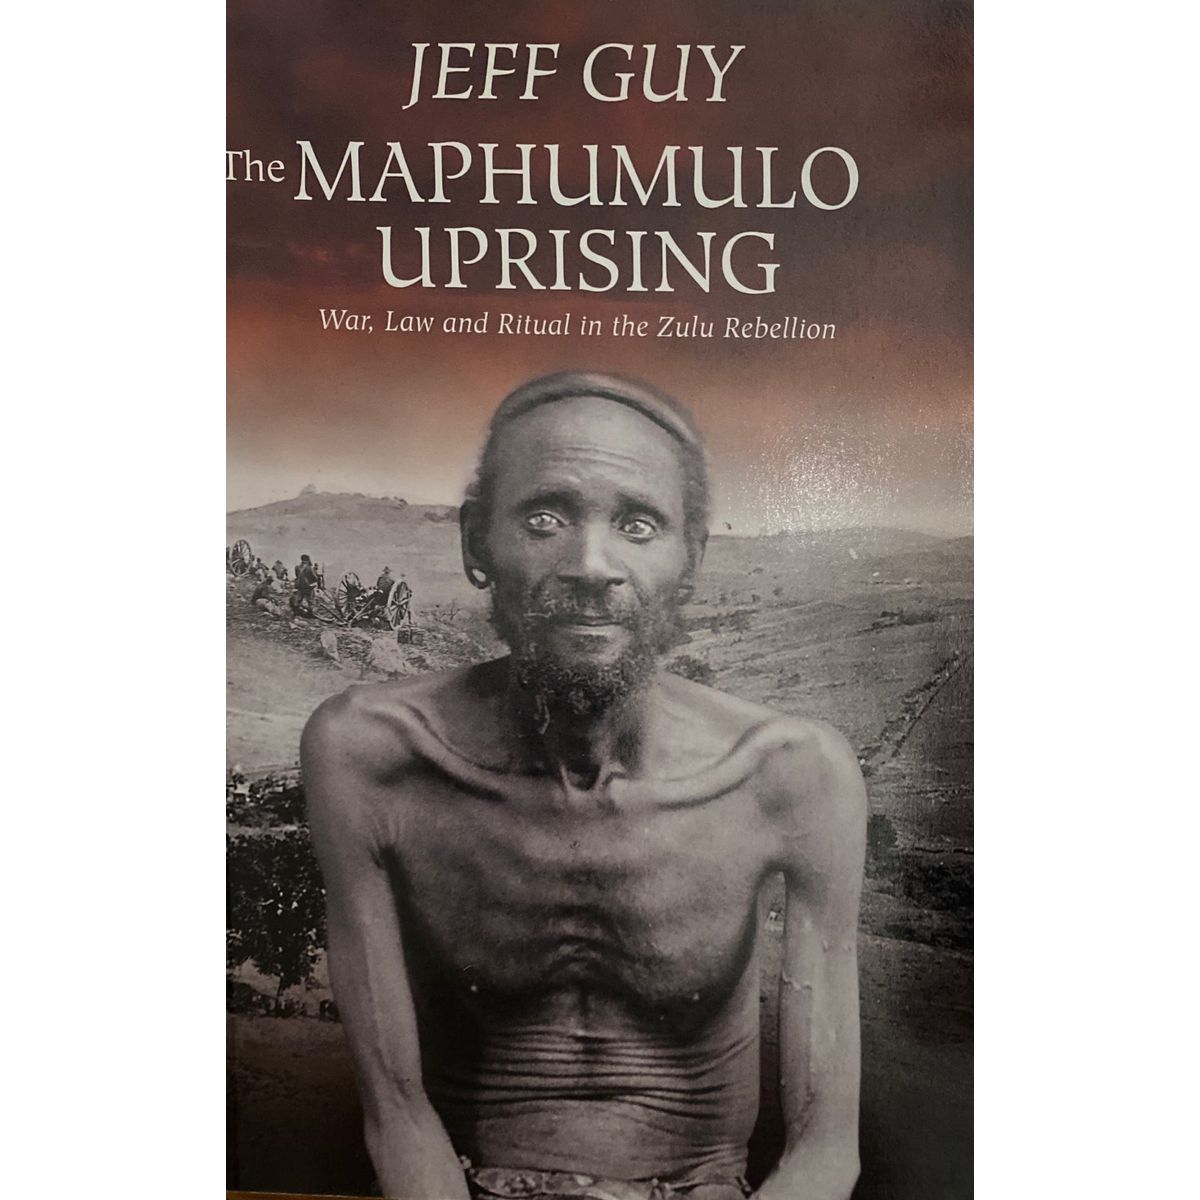 ISBN: 9781869140489 / 1869140486 - The Maphumulo Uprising: War, Law and Ritual in the Zulu Rebellion by Jeff Guy [2005]